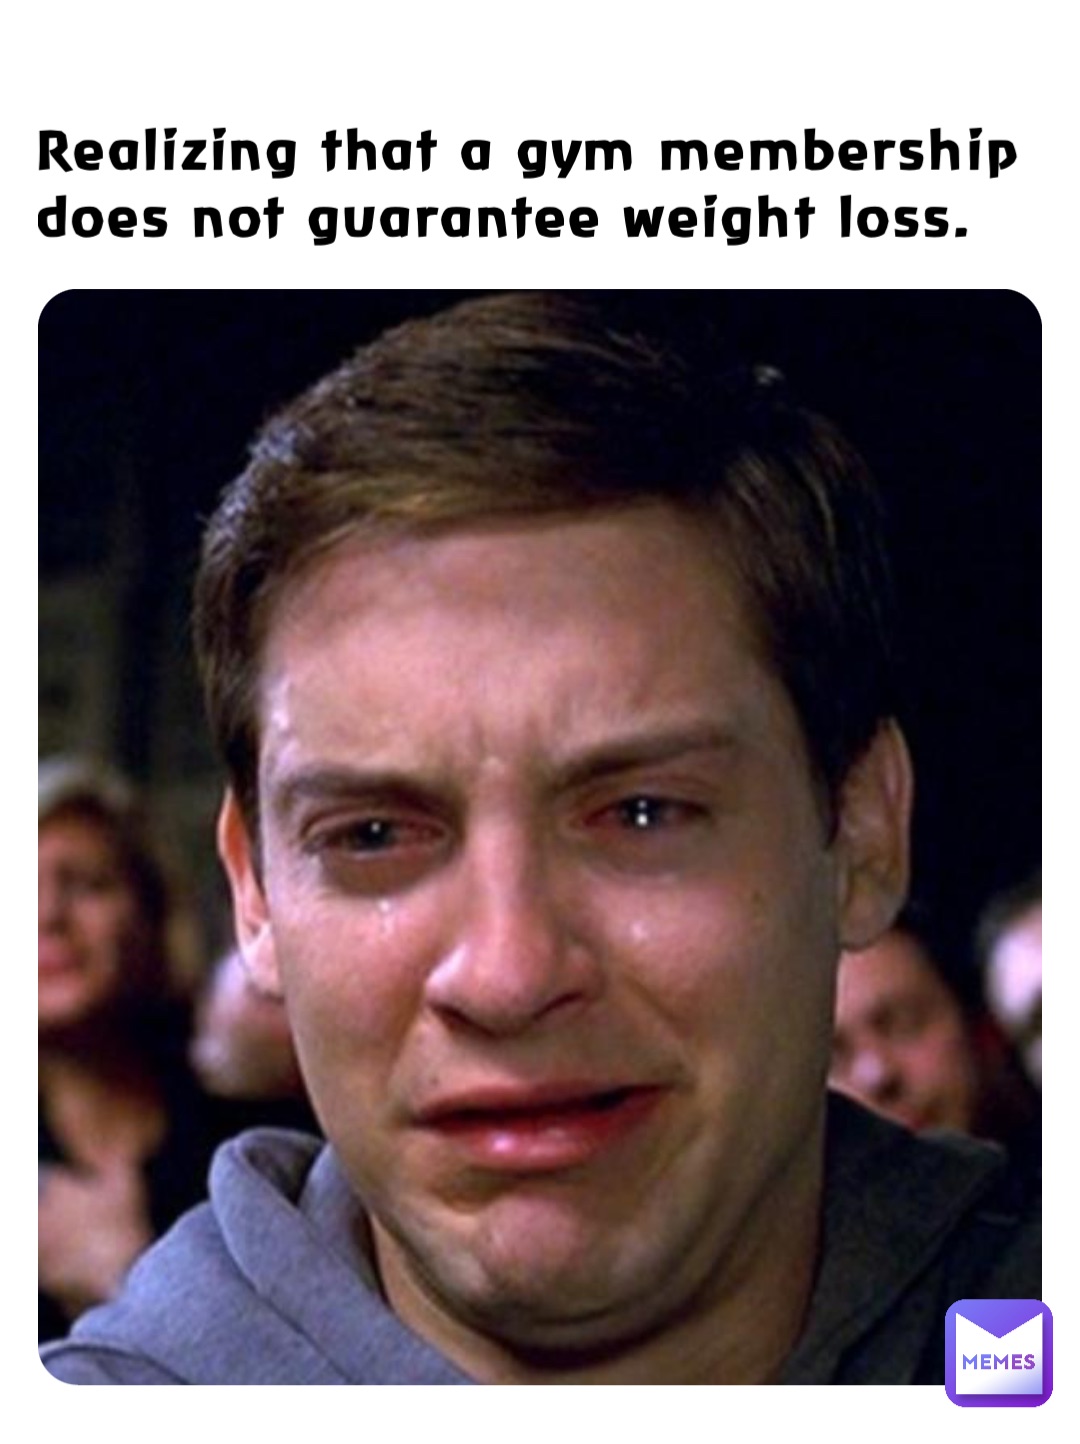 Realizing that a gym membership does not guarantee weight loss.